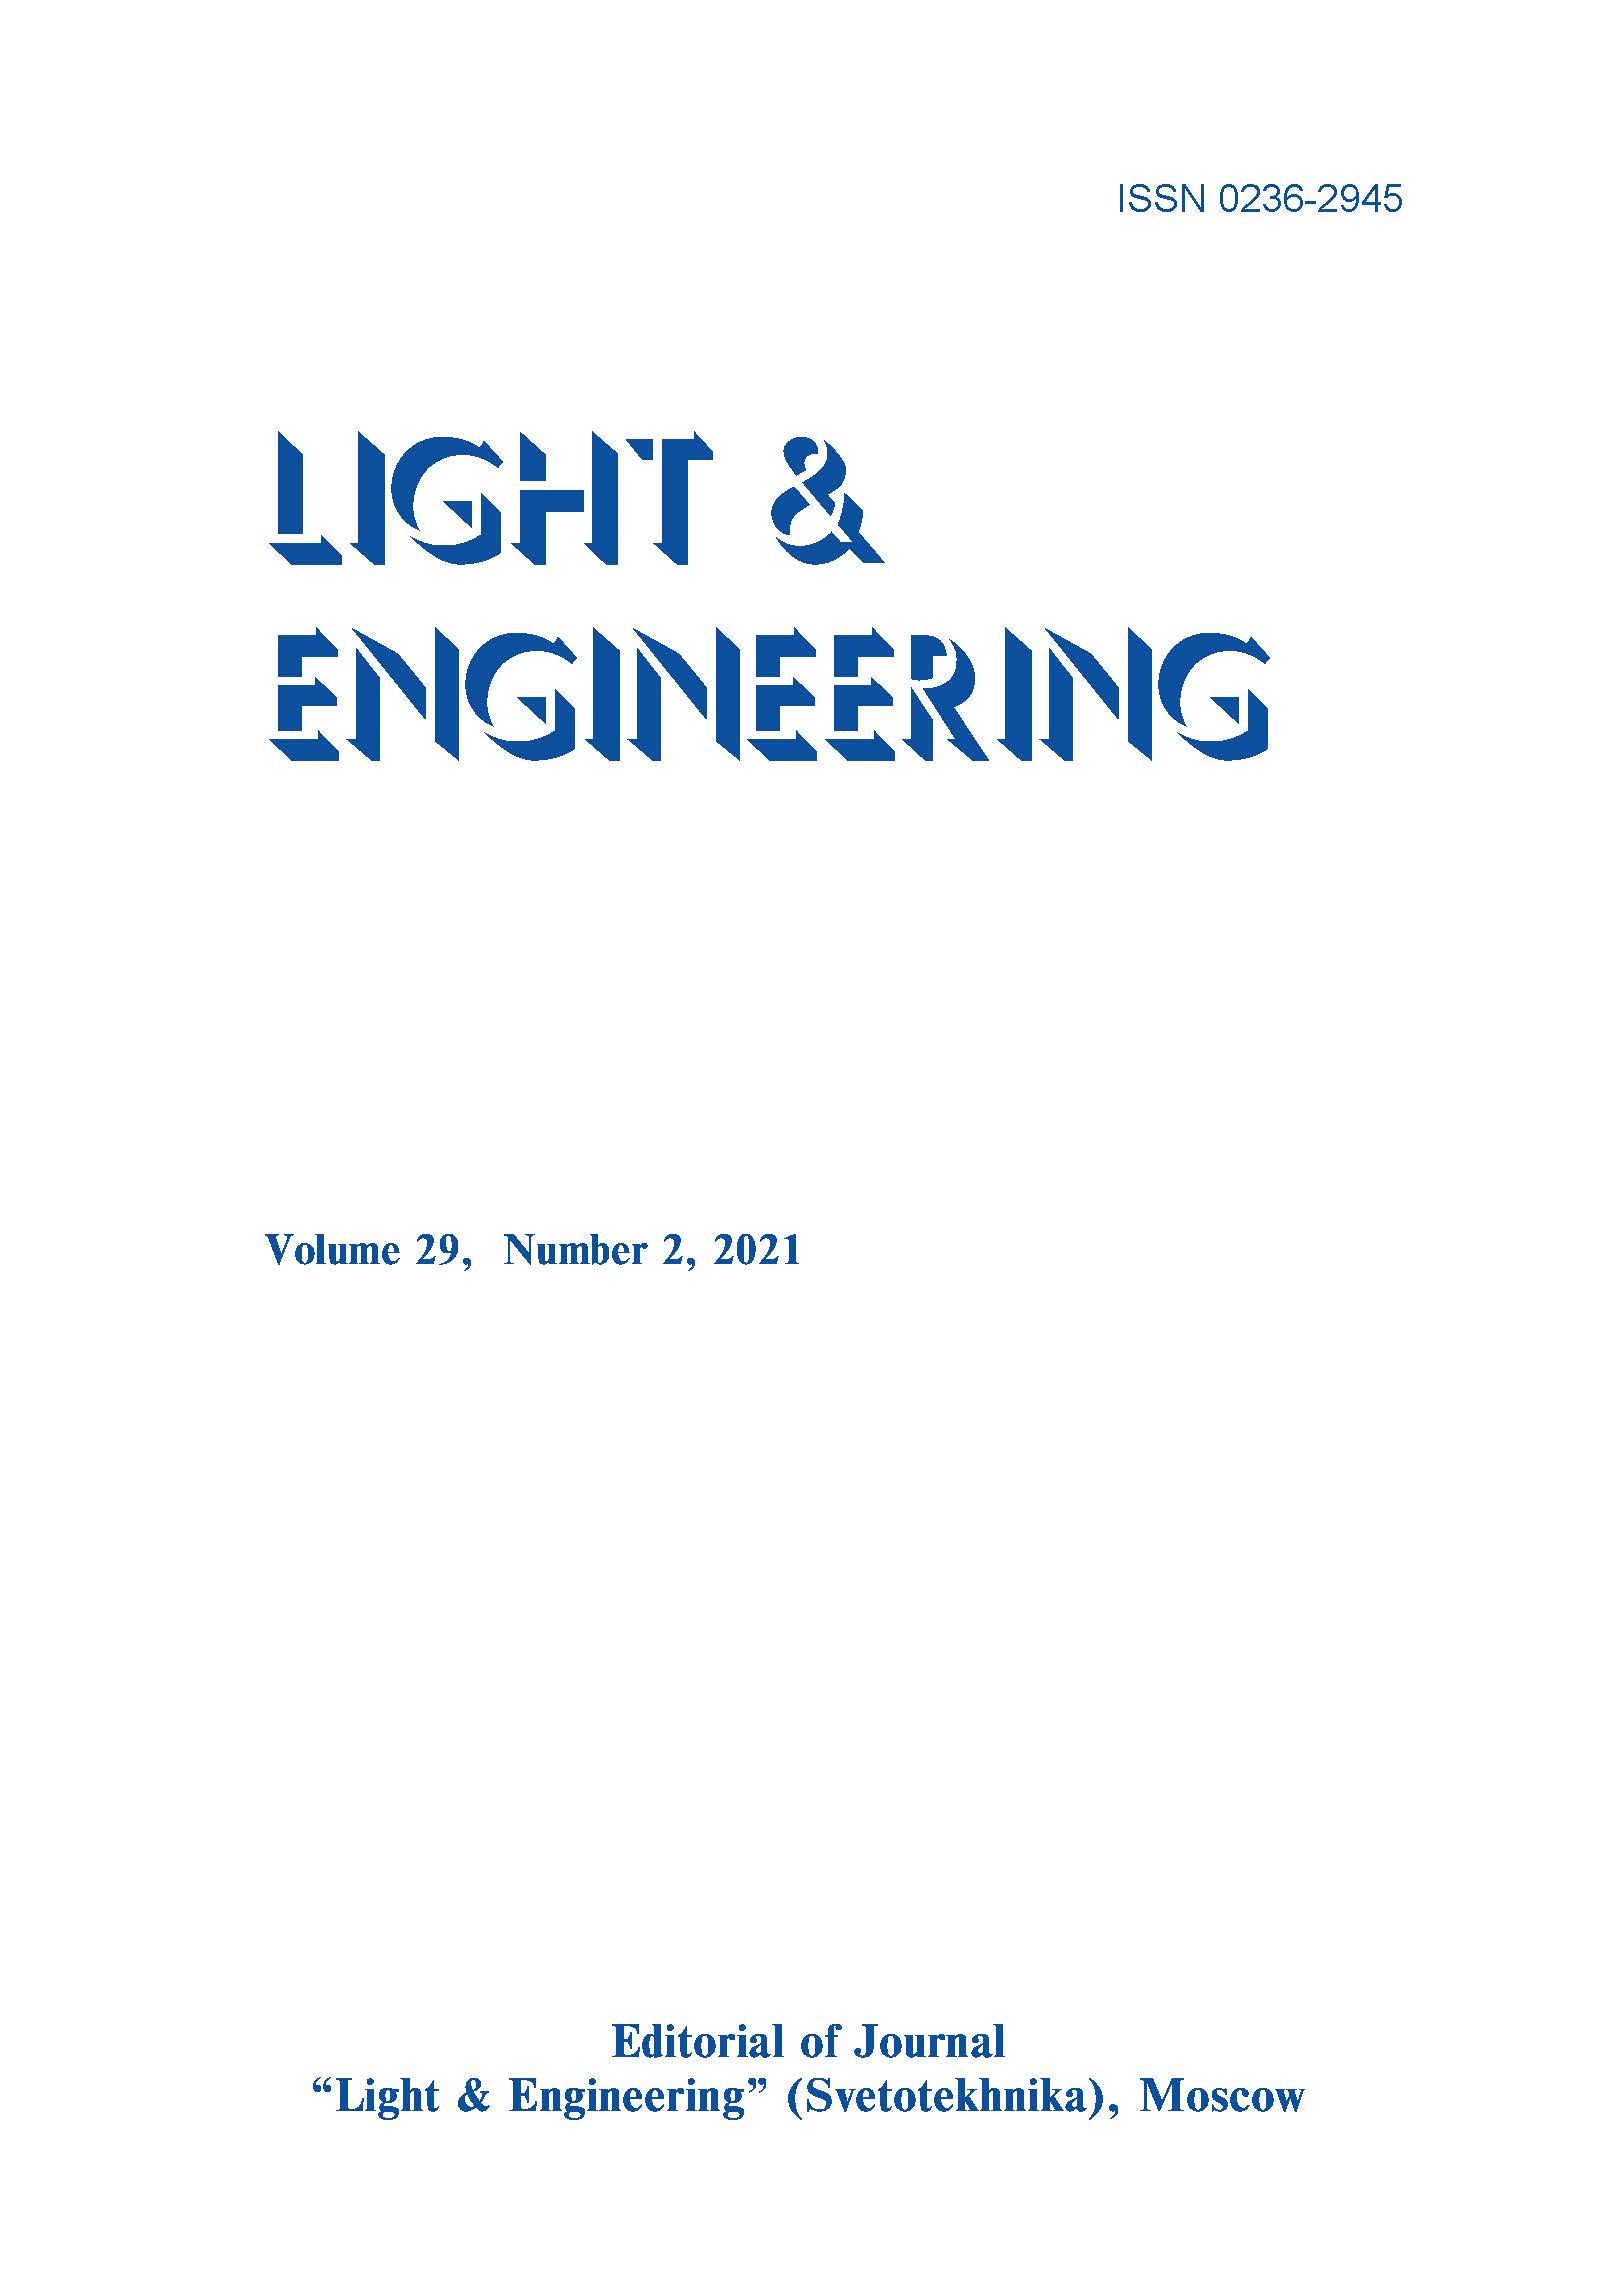 Simulation Study on Factors to be Considered for Each Type of Indoor Luminaires and Light Sources when Converting to LEDs L&E, Vol. 29, No. 2, 2021